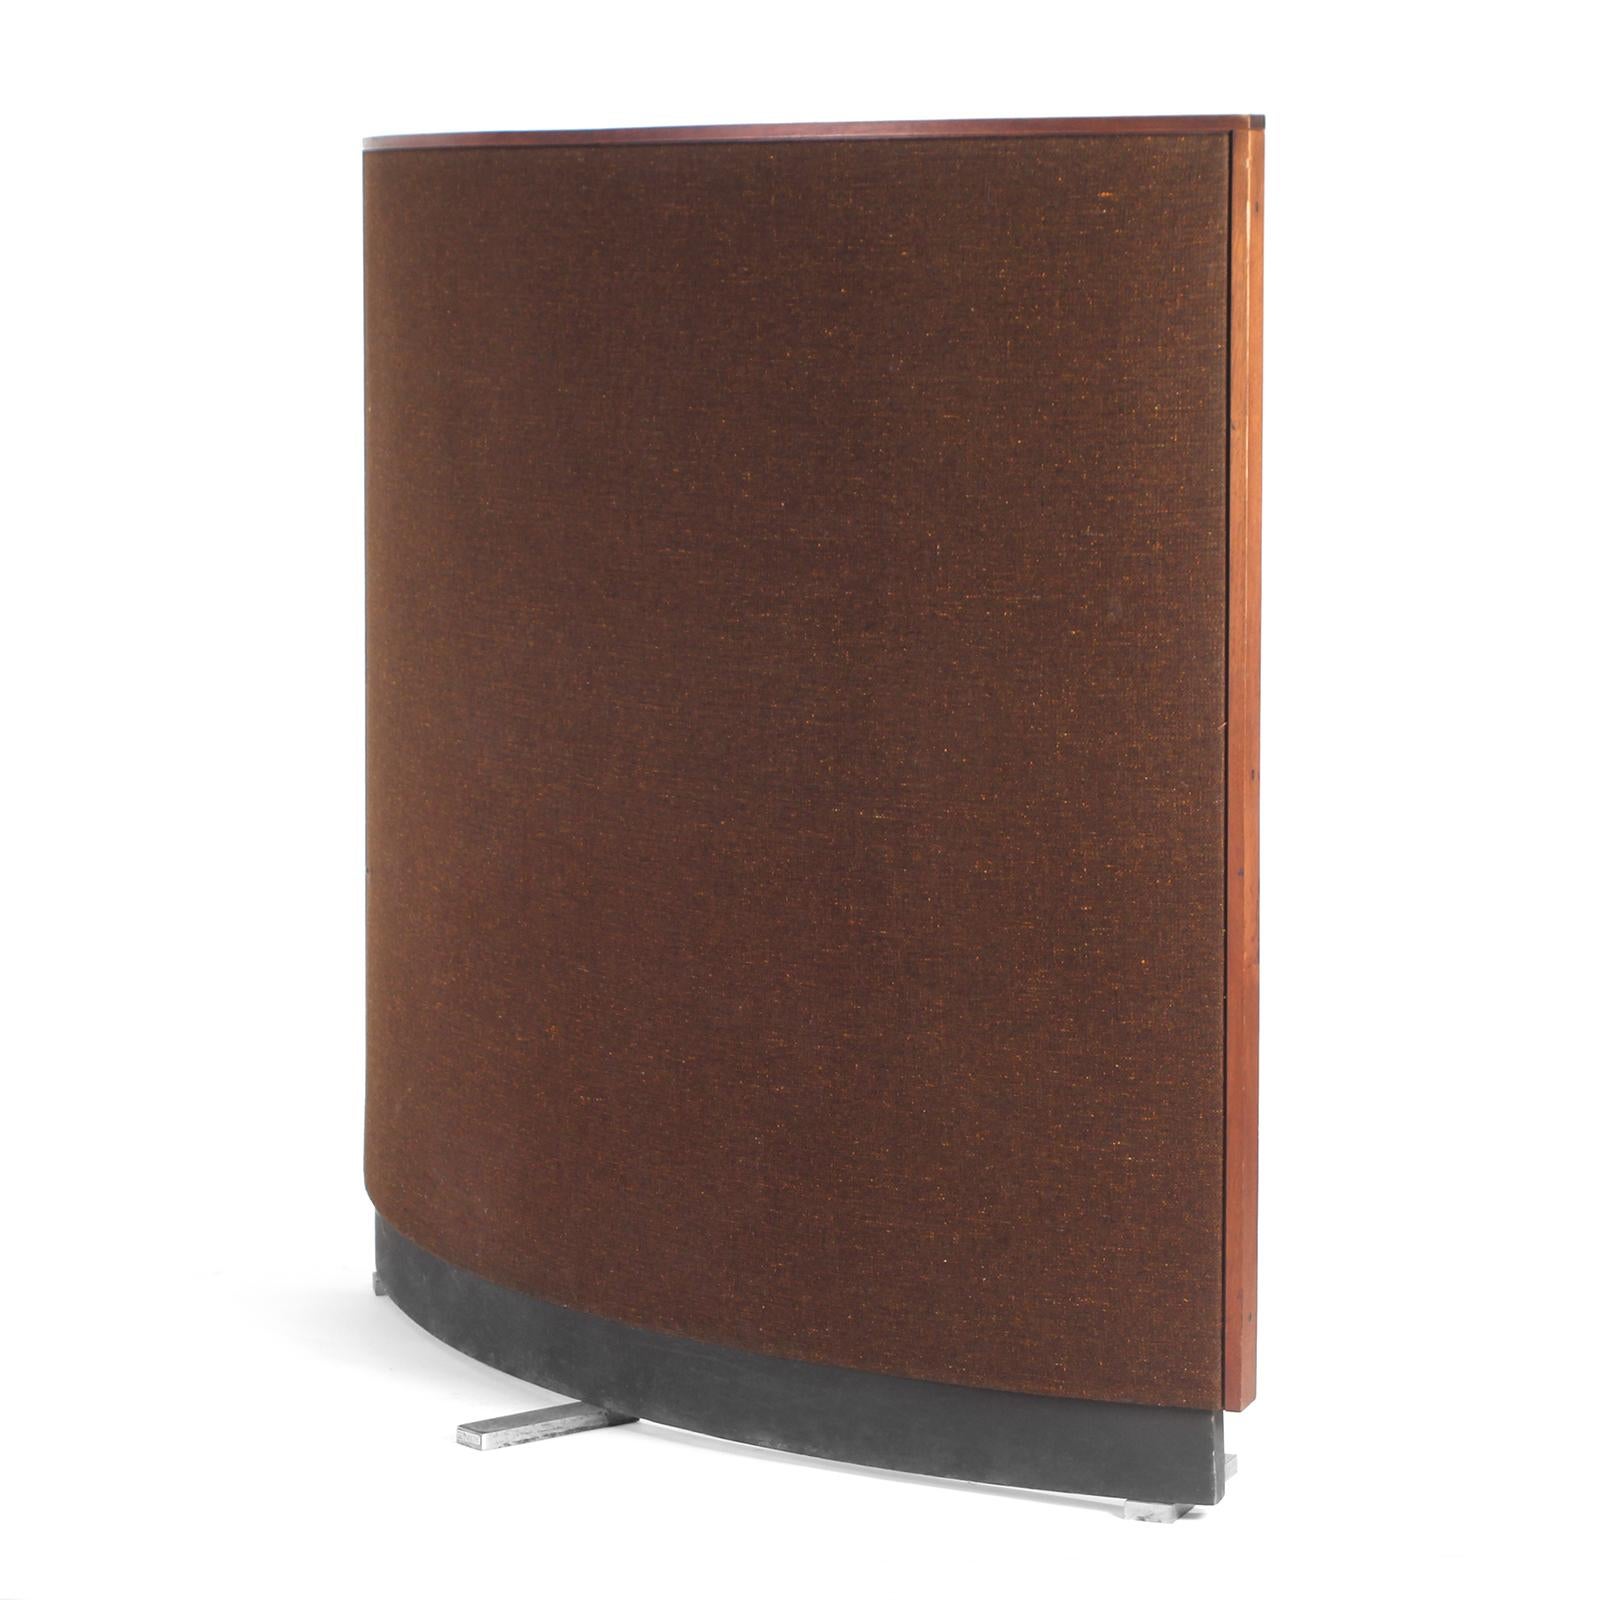 A curved room divider with a solid wood frame upholstered in brown fabric.